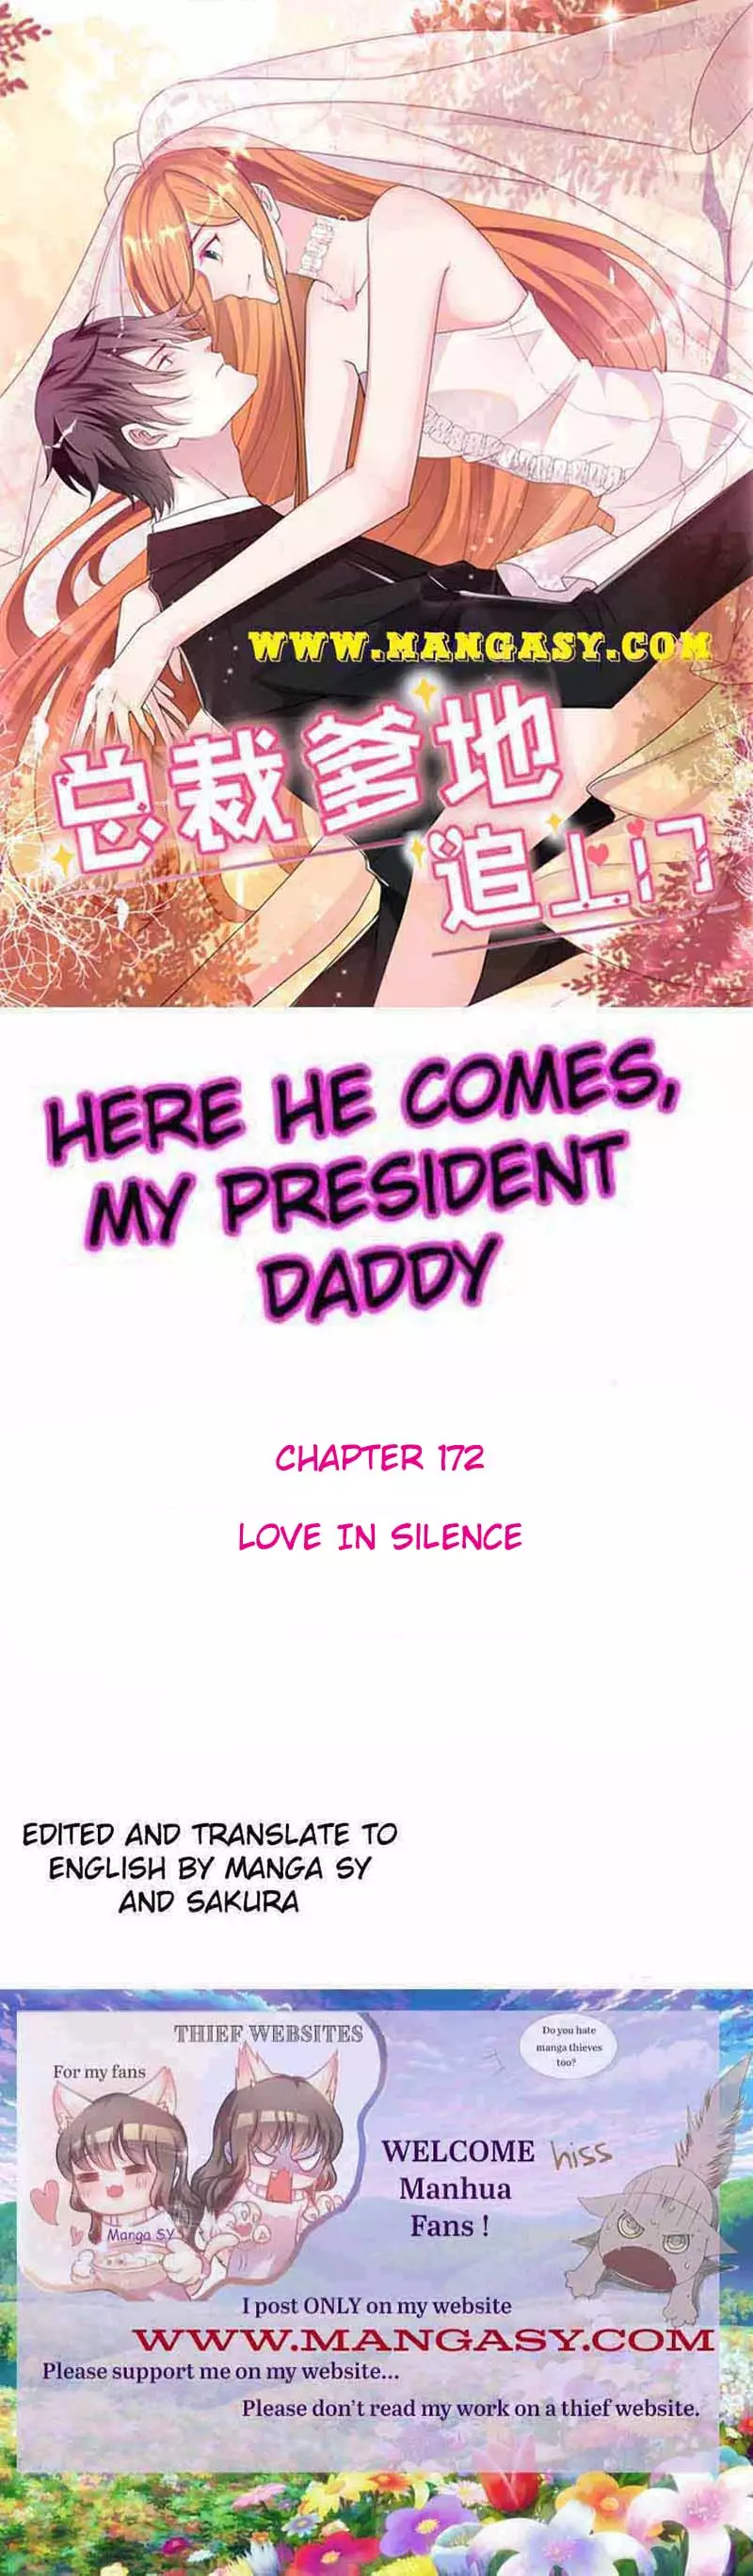 President Daddy Is Chasing You - 172 page 1-8428de36